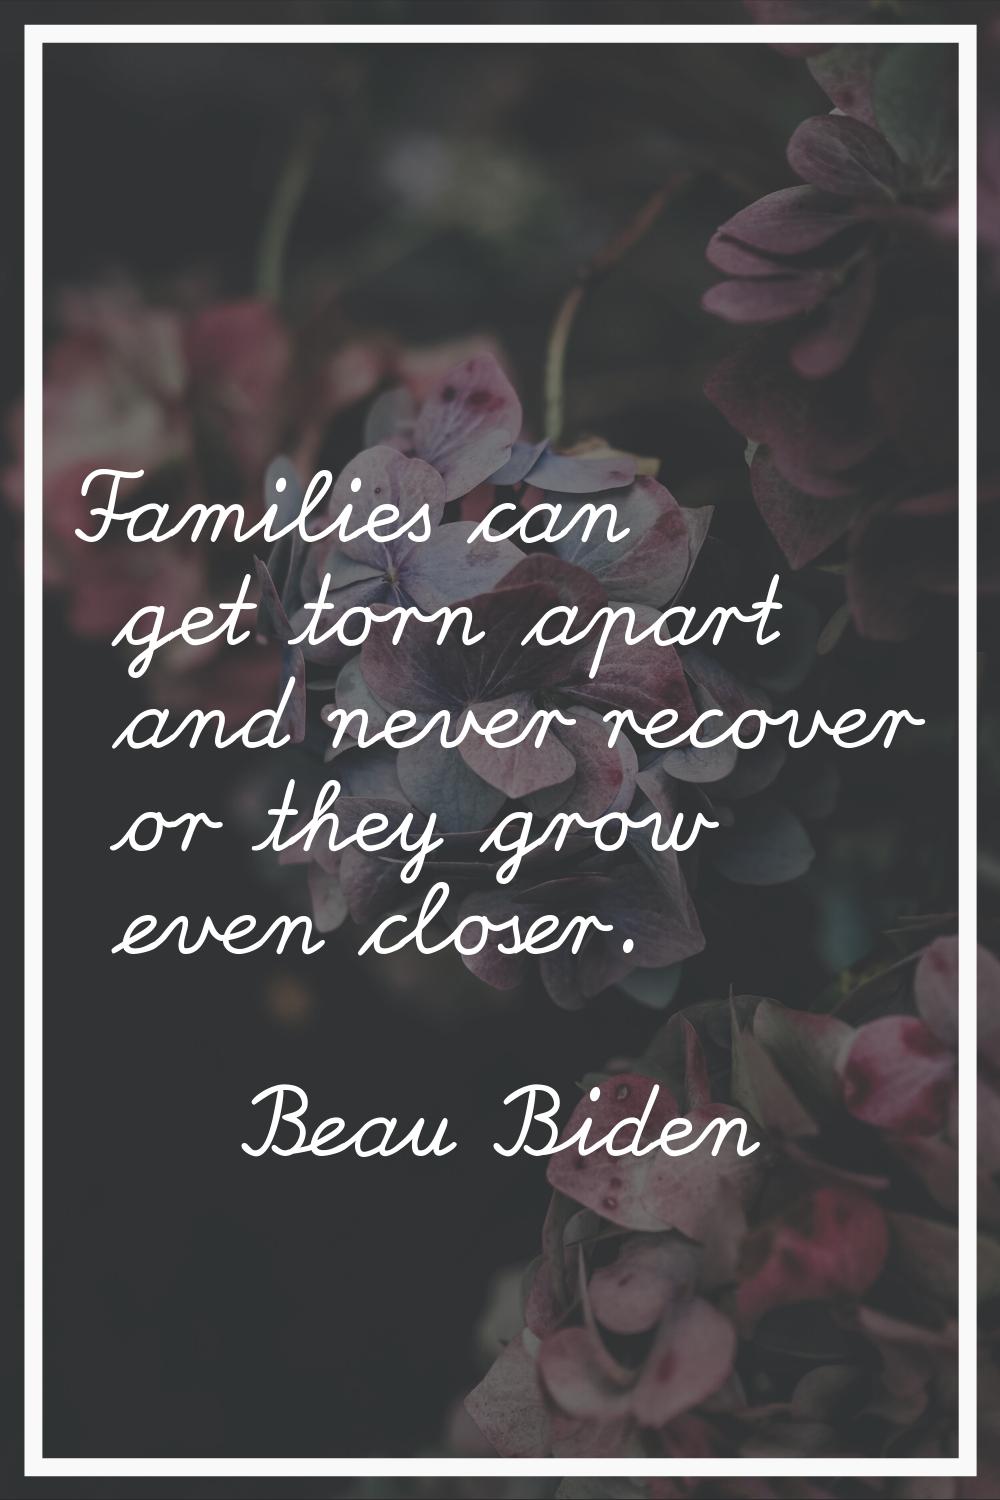 Families can get torn apart and never recover or they grow even closer.